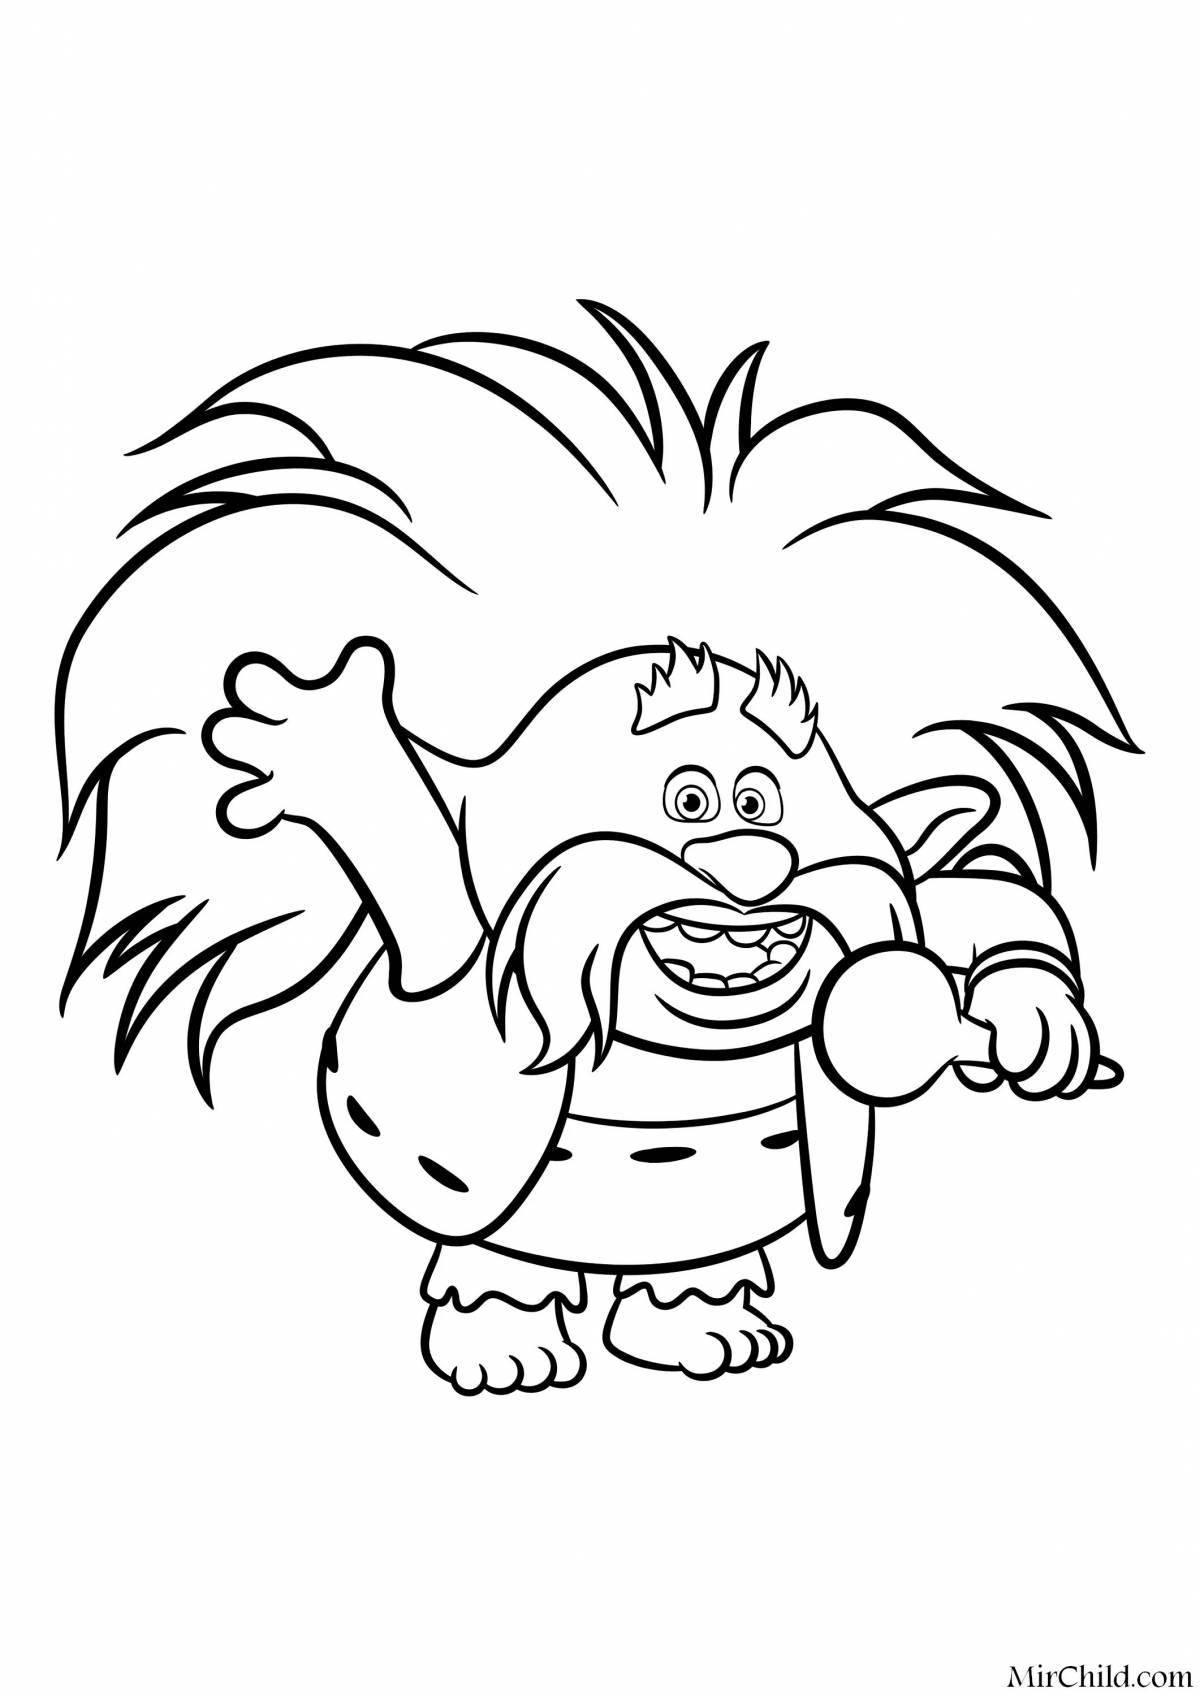 Irresistible coloring pages for kids trolls